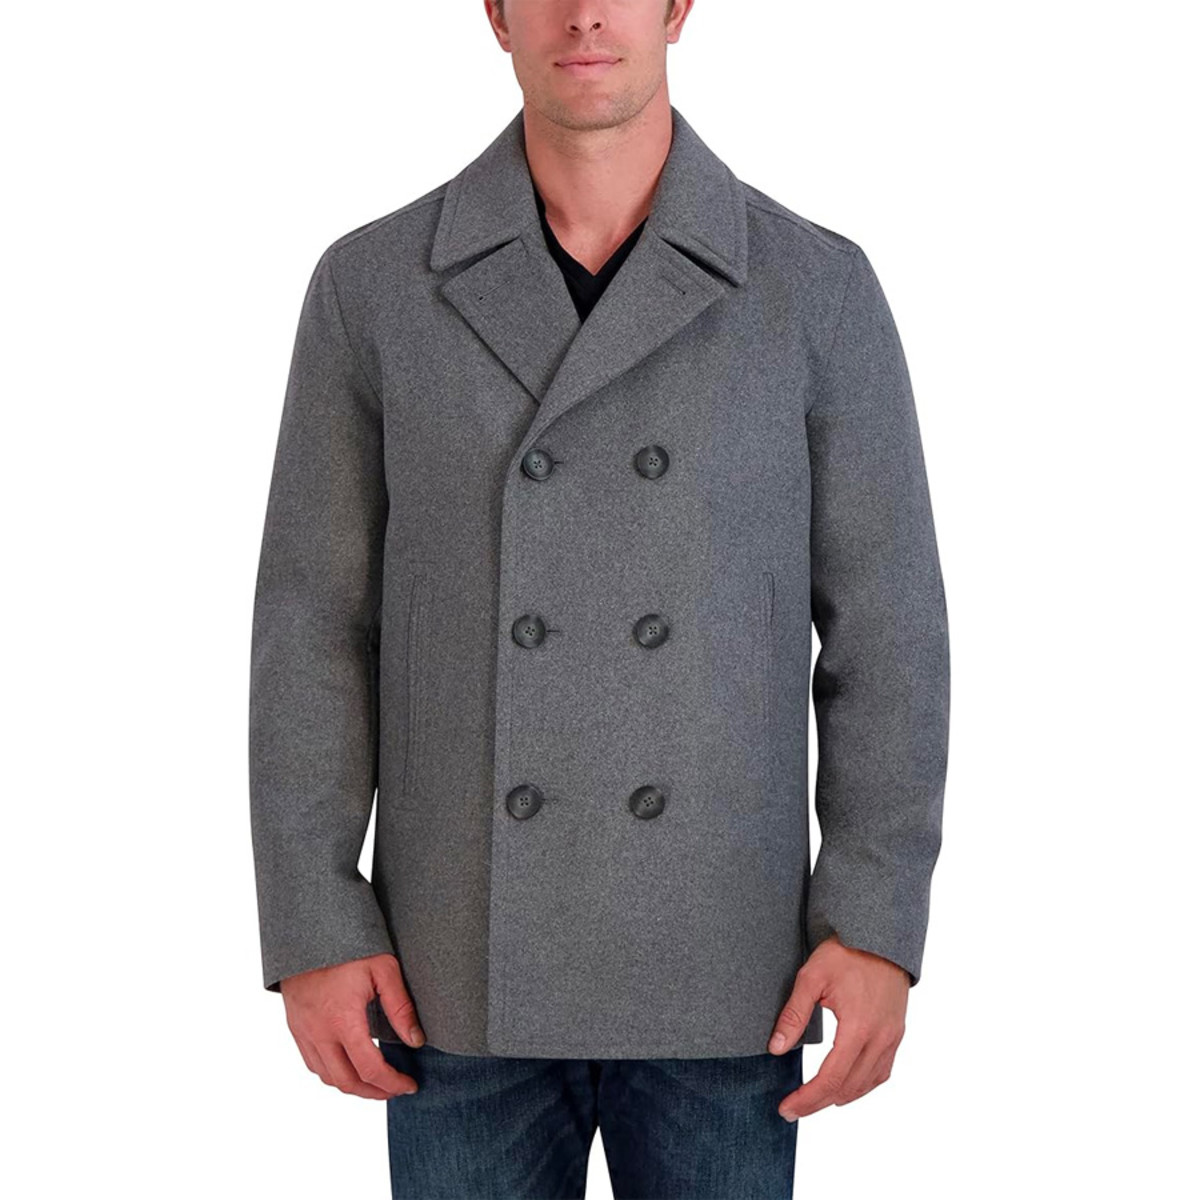 A Nautica Wool Peacoat is Up to 65% Off Right Now on Amazon - Men's Journal